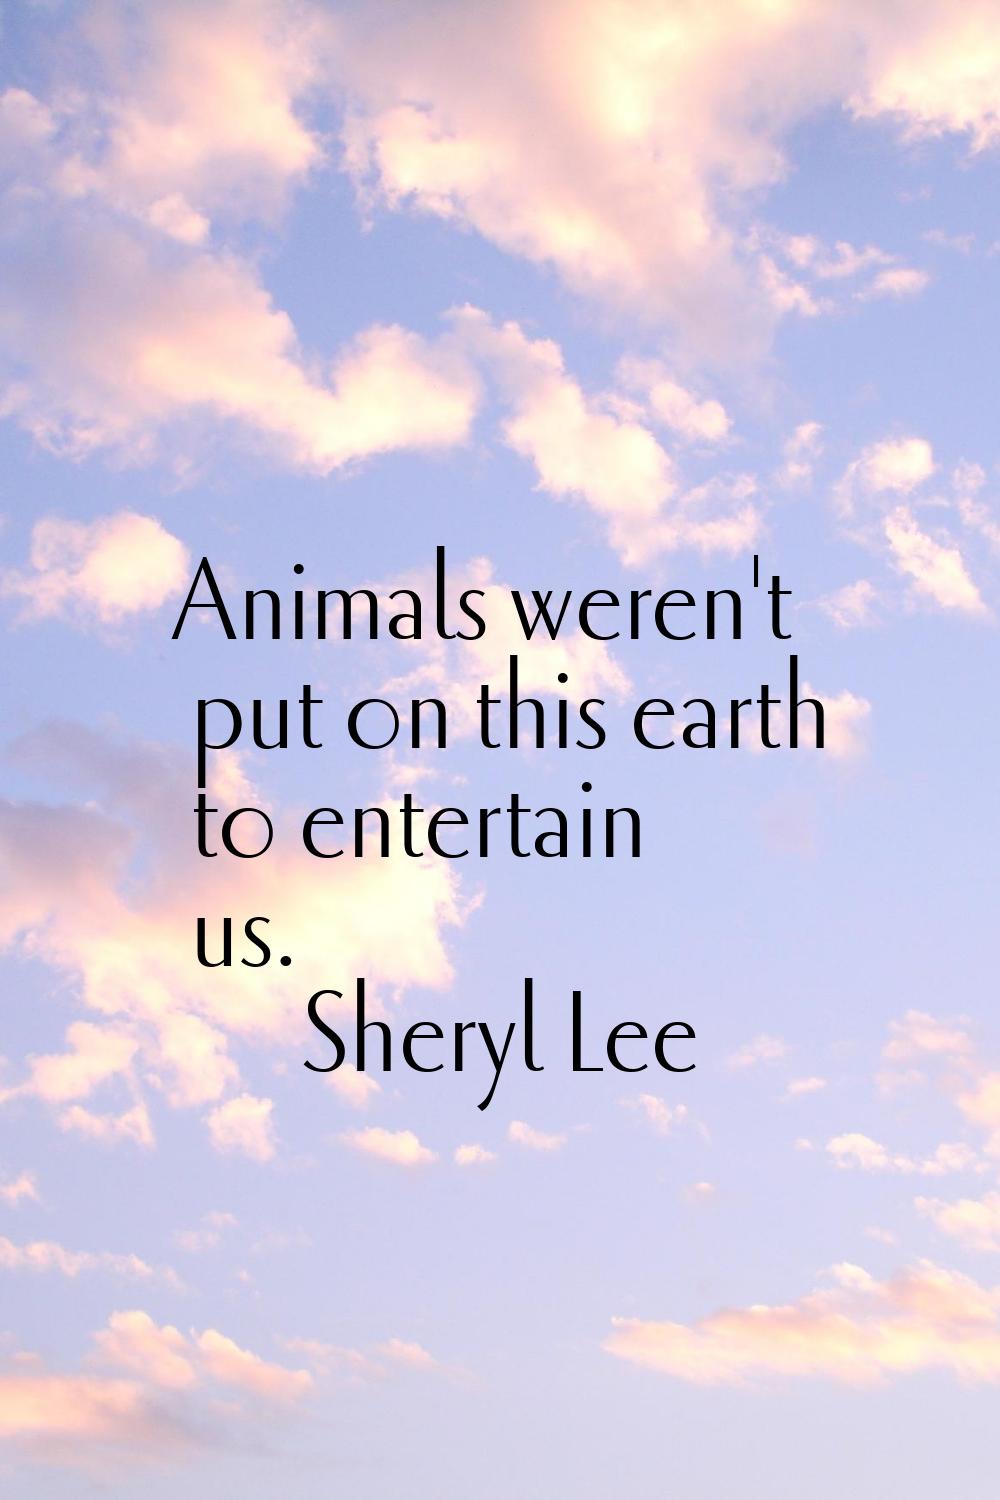 Animals weren't put on this earth to entertain us.